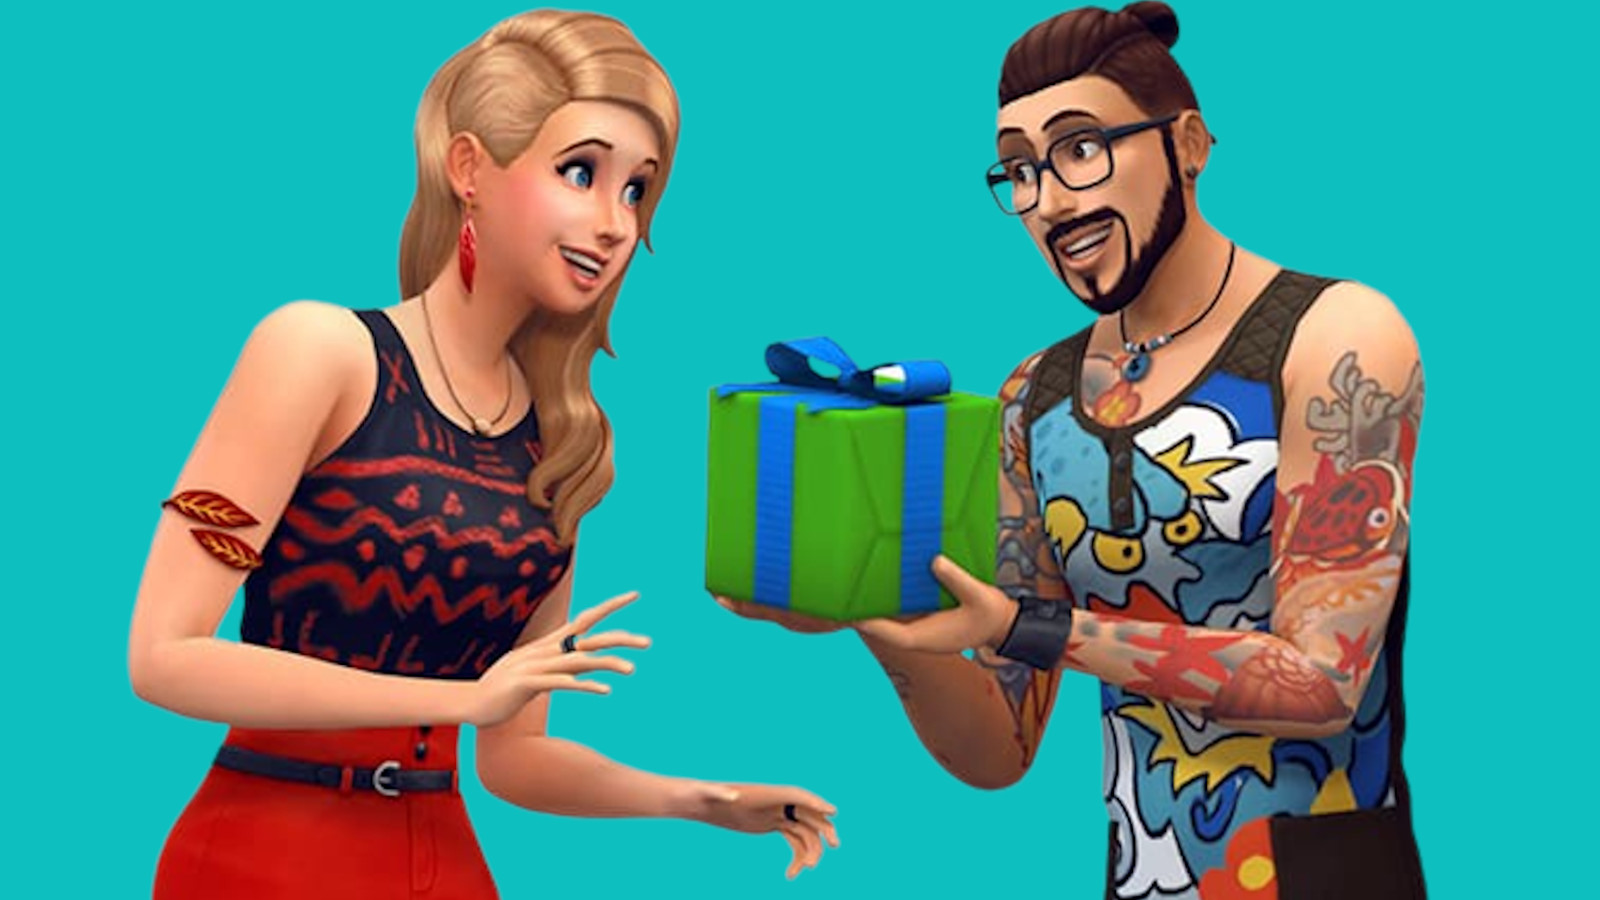 Today's Your Last Chance to Get the Sims 4 Desert Luxe Kit Free on